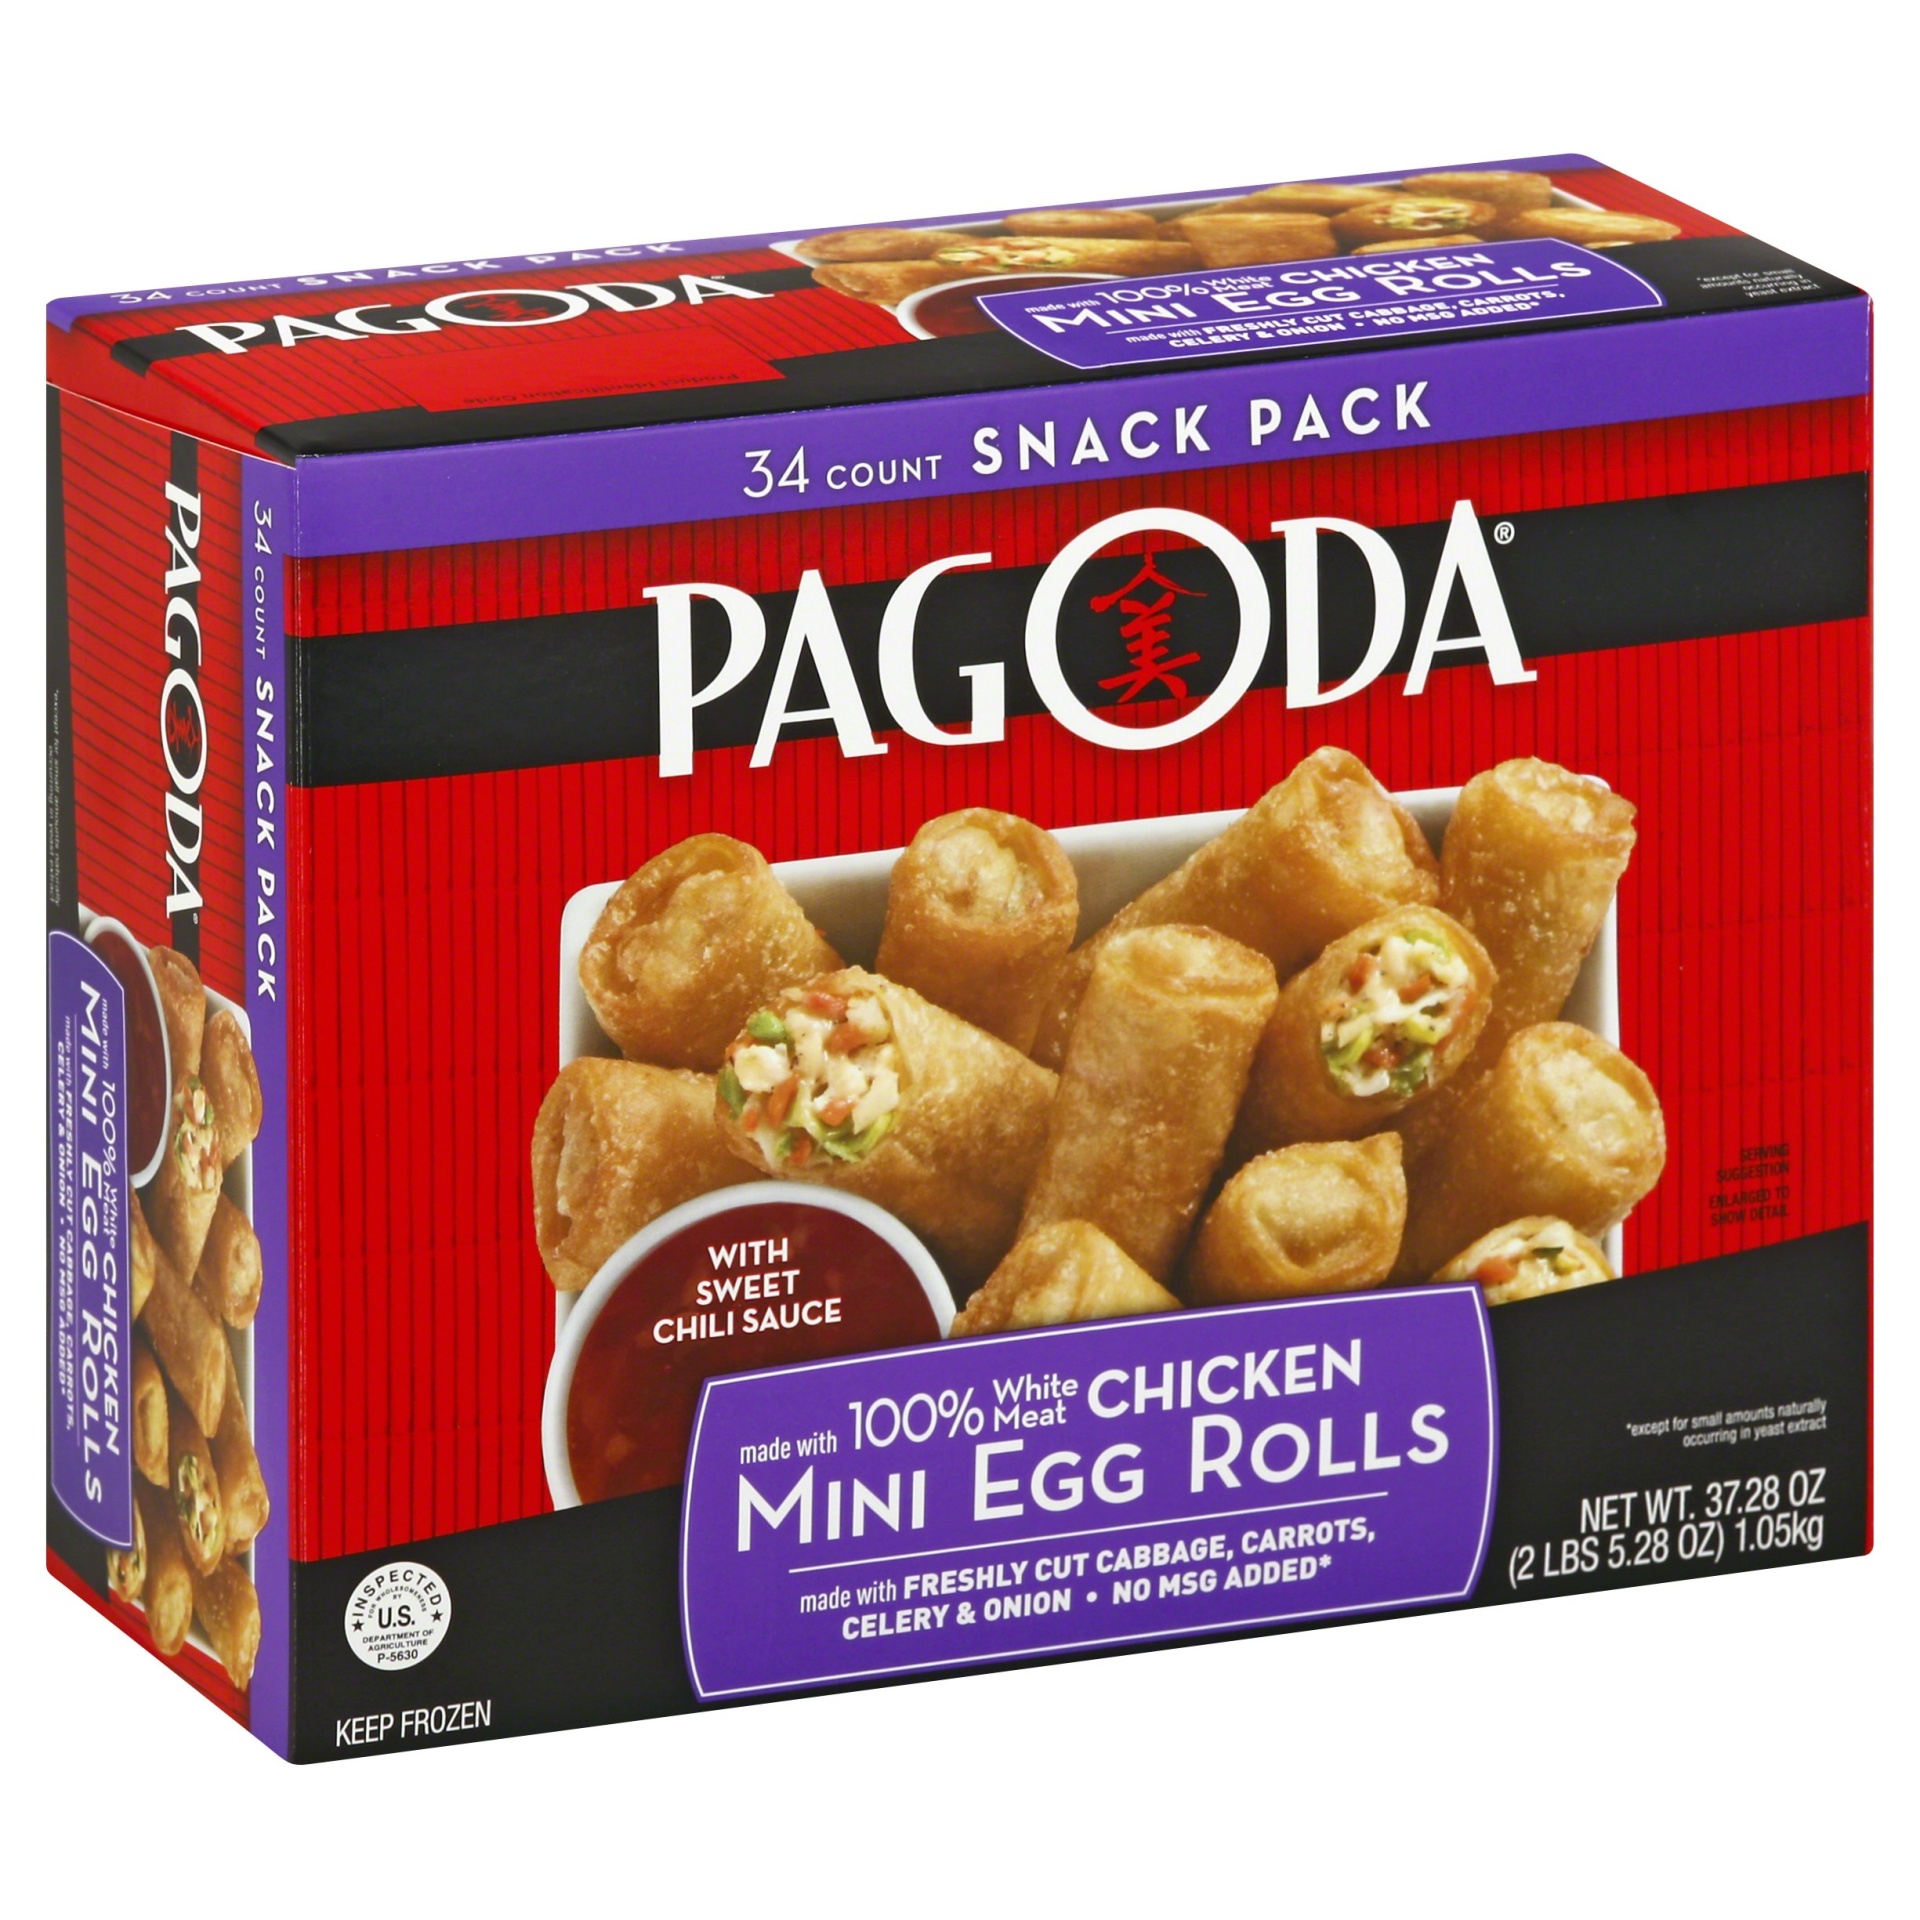 slide 1 of 1, Pagoda Express White Meat Chicken Mini Egg Rolls With Sweet Chili Sauce, 37.28 oz